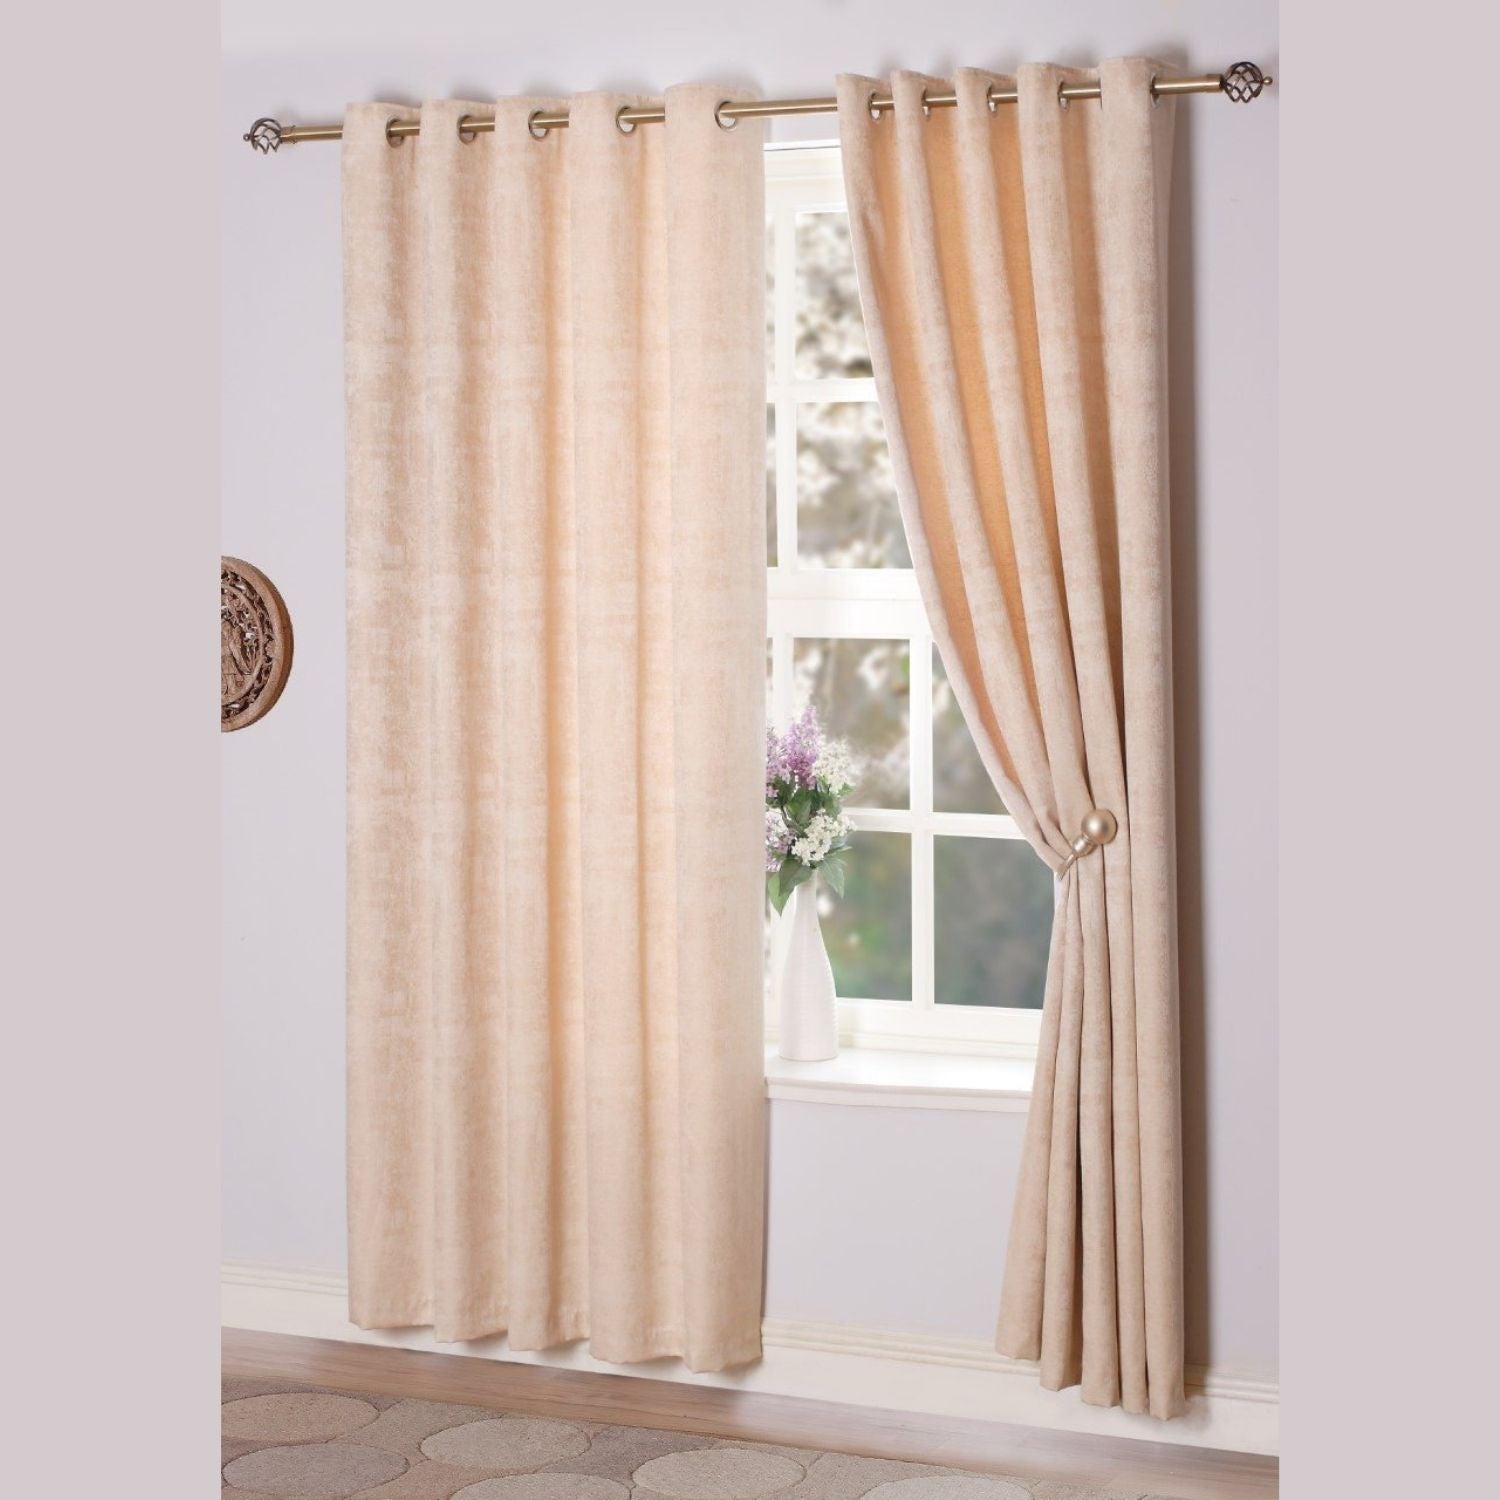 The Home Living Room Fiesta Ring Top Curtains - Champagne 1 Shaws Department Stores